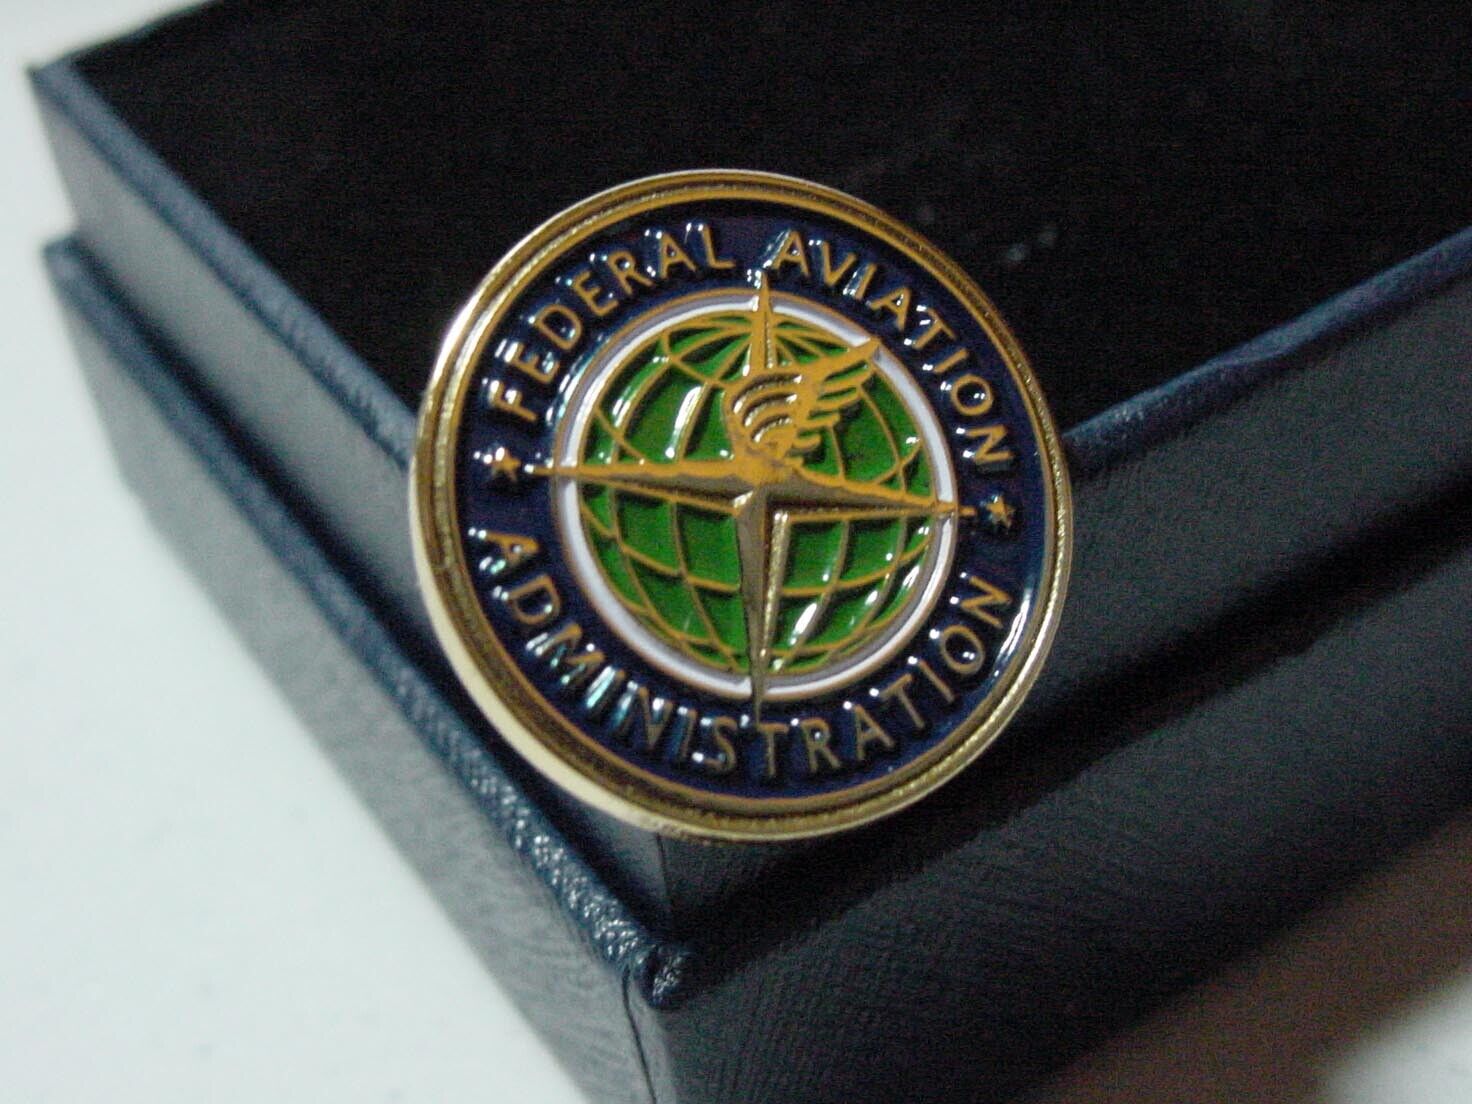  FEDERAL AVIATION ADMINISTRATION FAA LAPEL PIN -  NEW